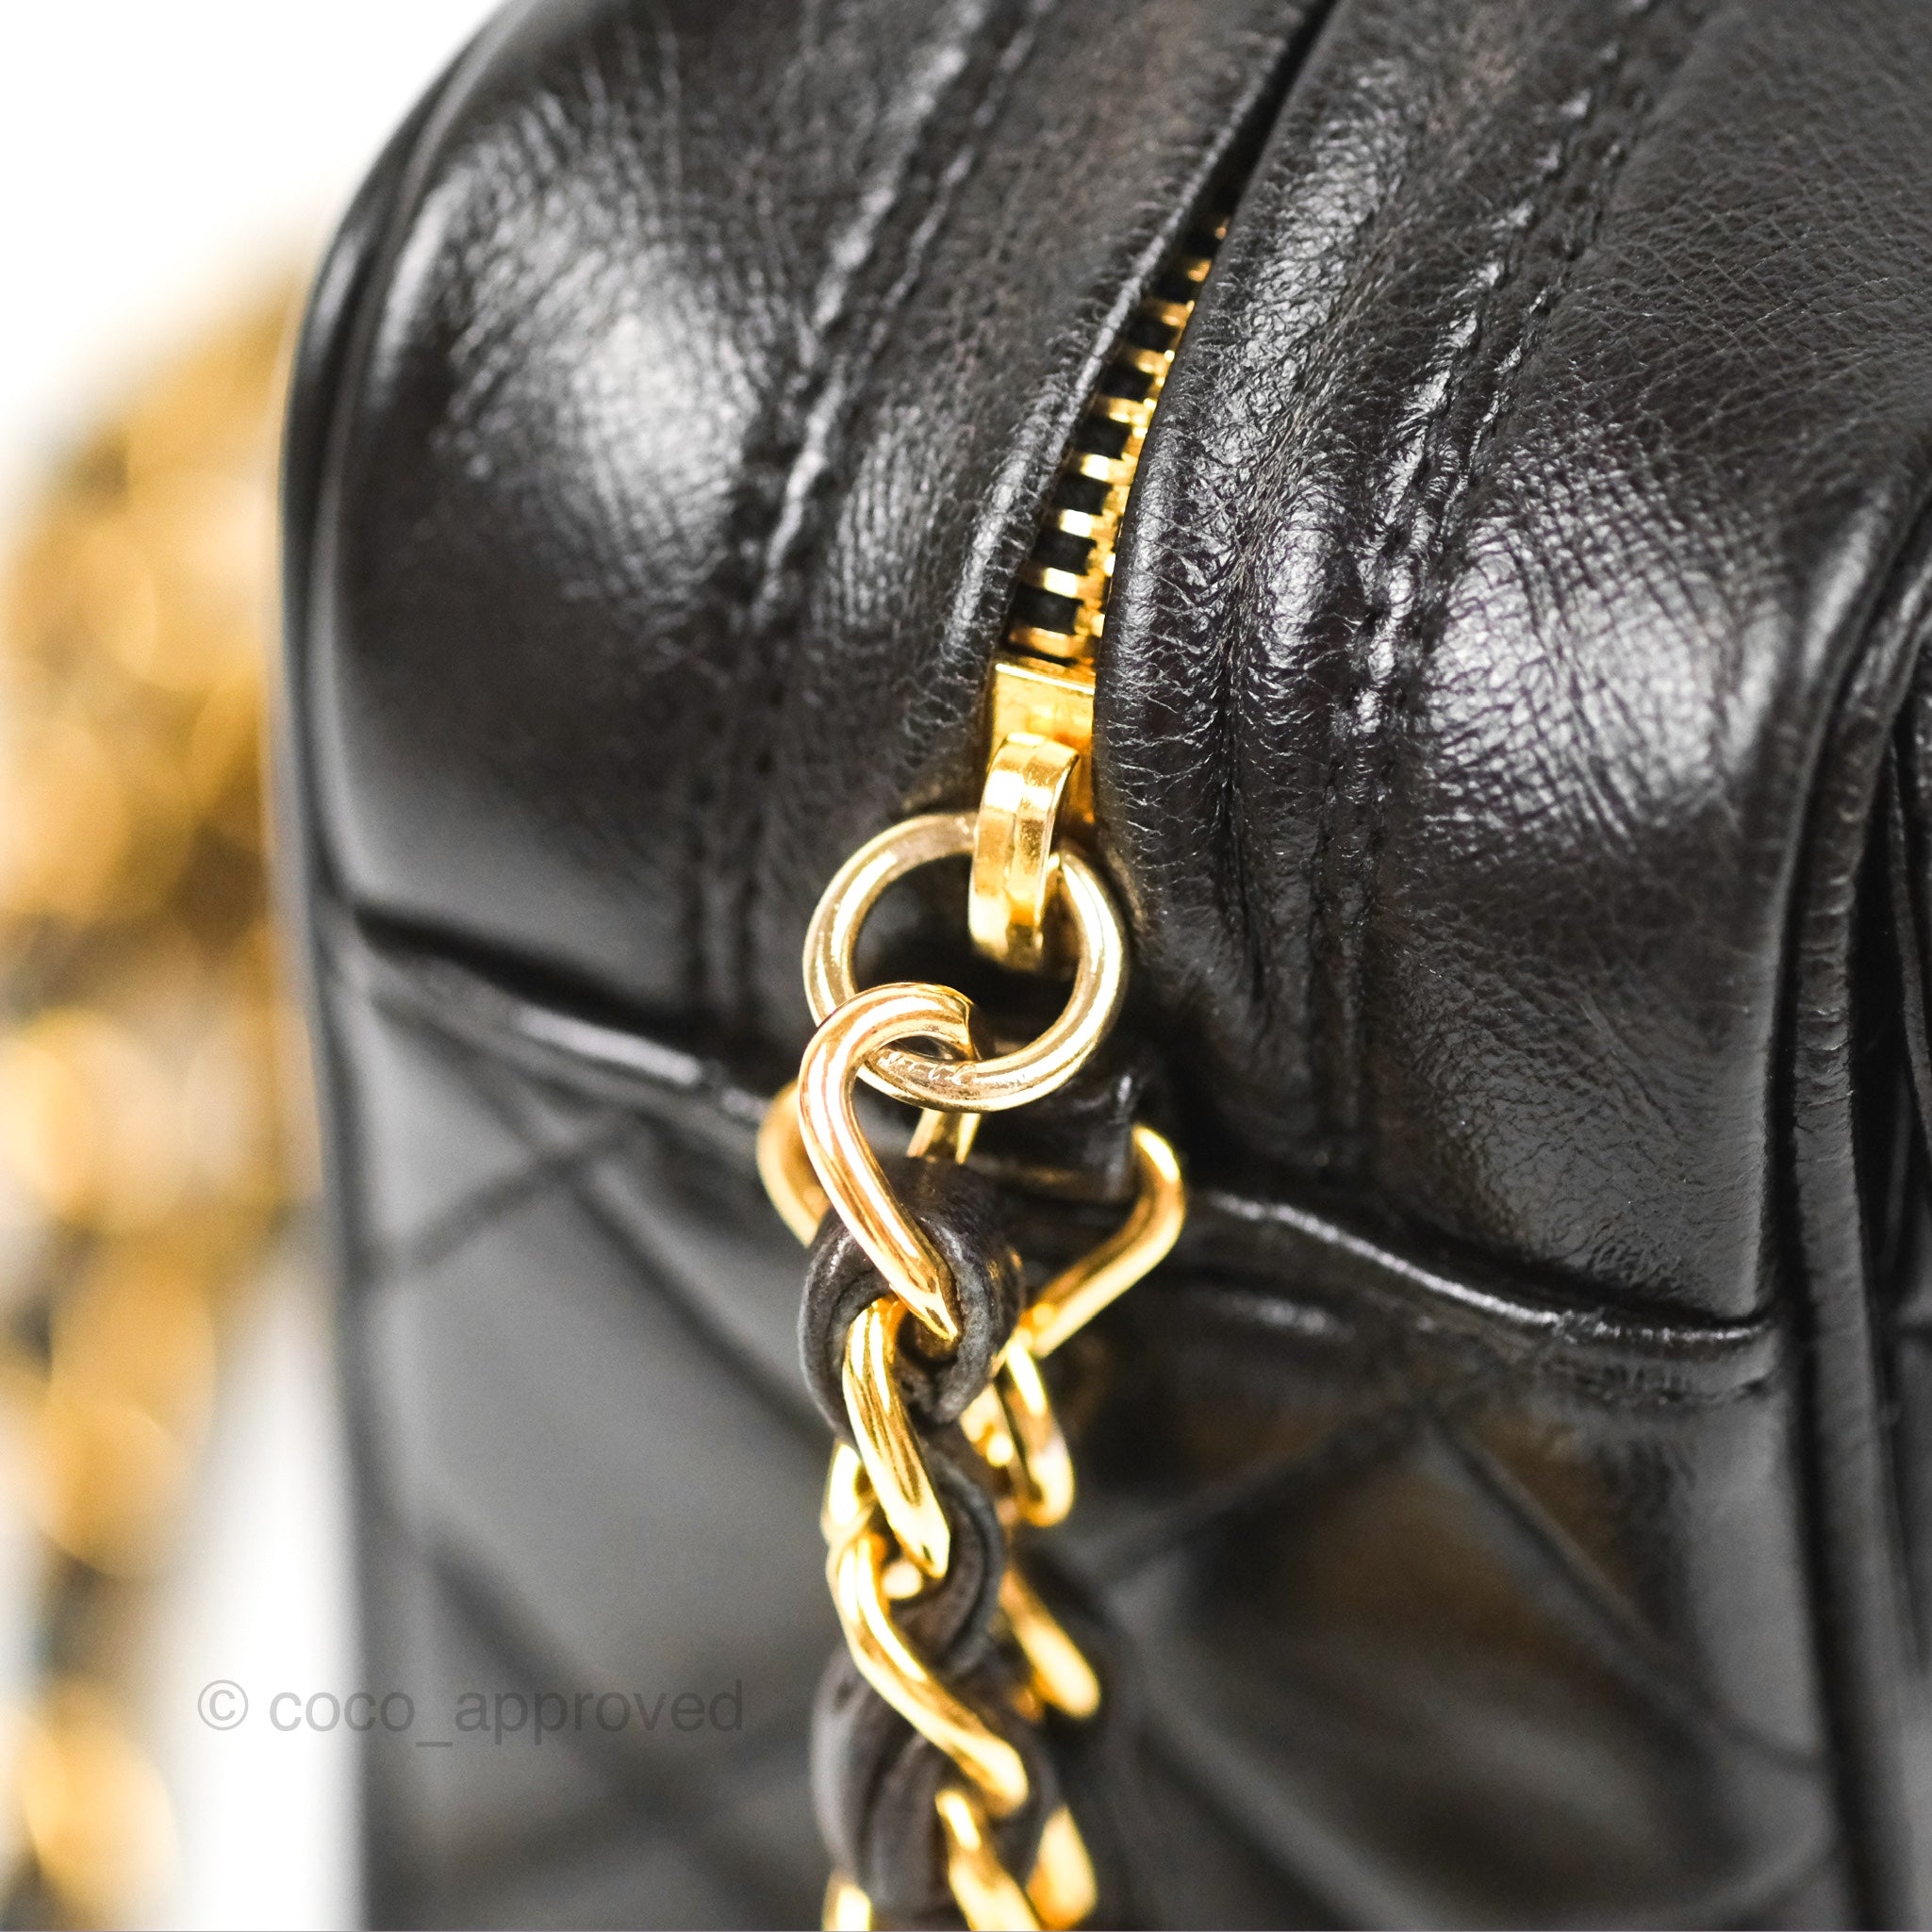 CHANEL Tassel Bags & Handbags for Women, Authenticity Guaranteed